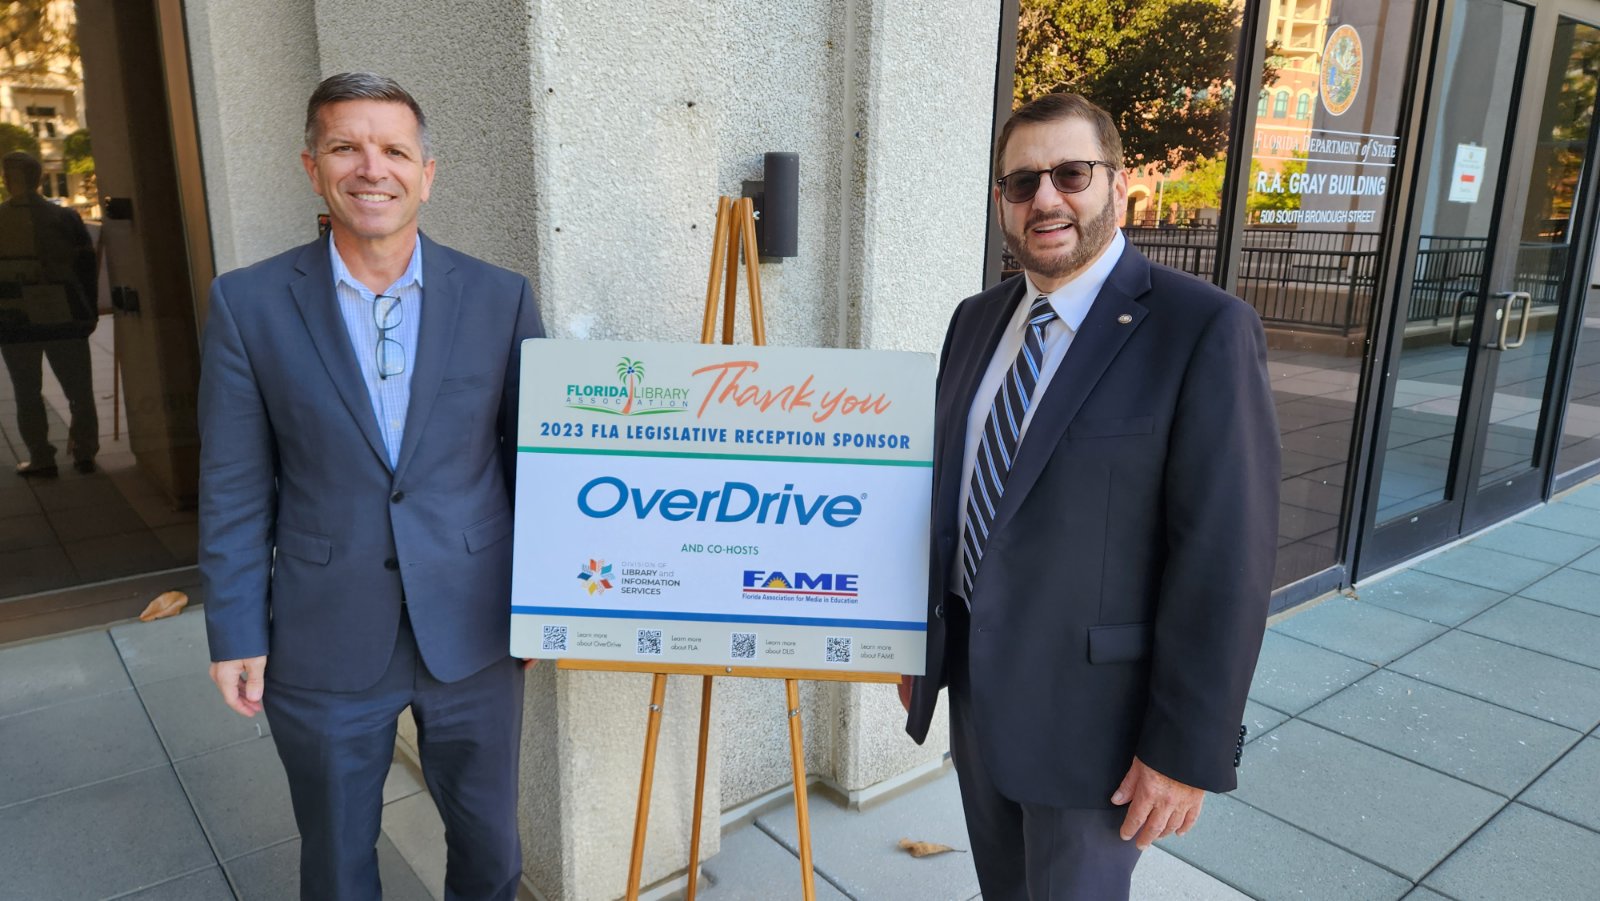 OverDrive founder and CEO Steve Potash recently attended FLA where OverDrive sponsored the legislative reception